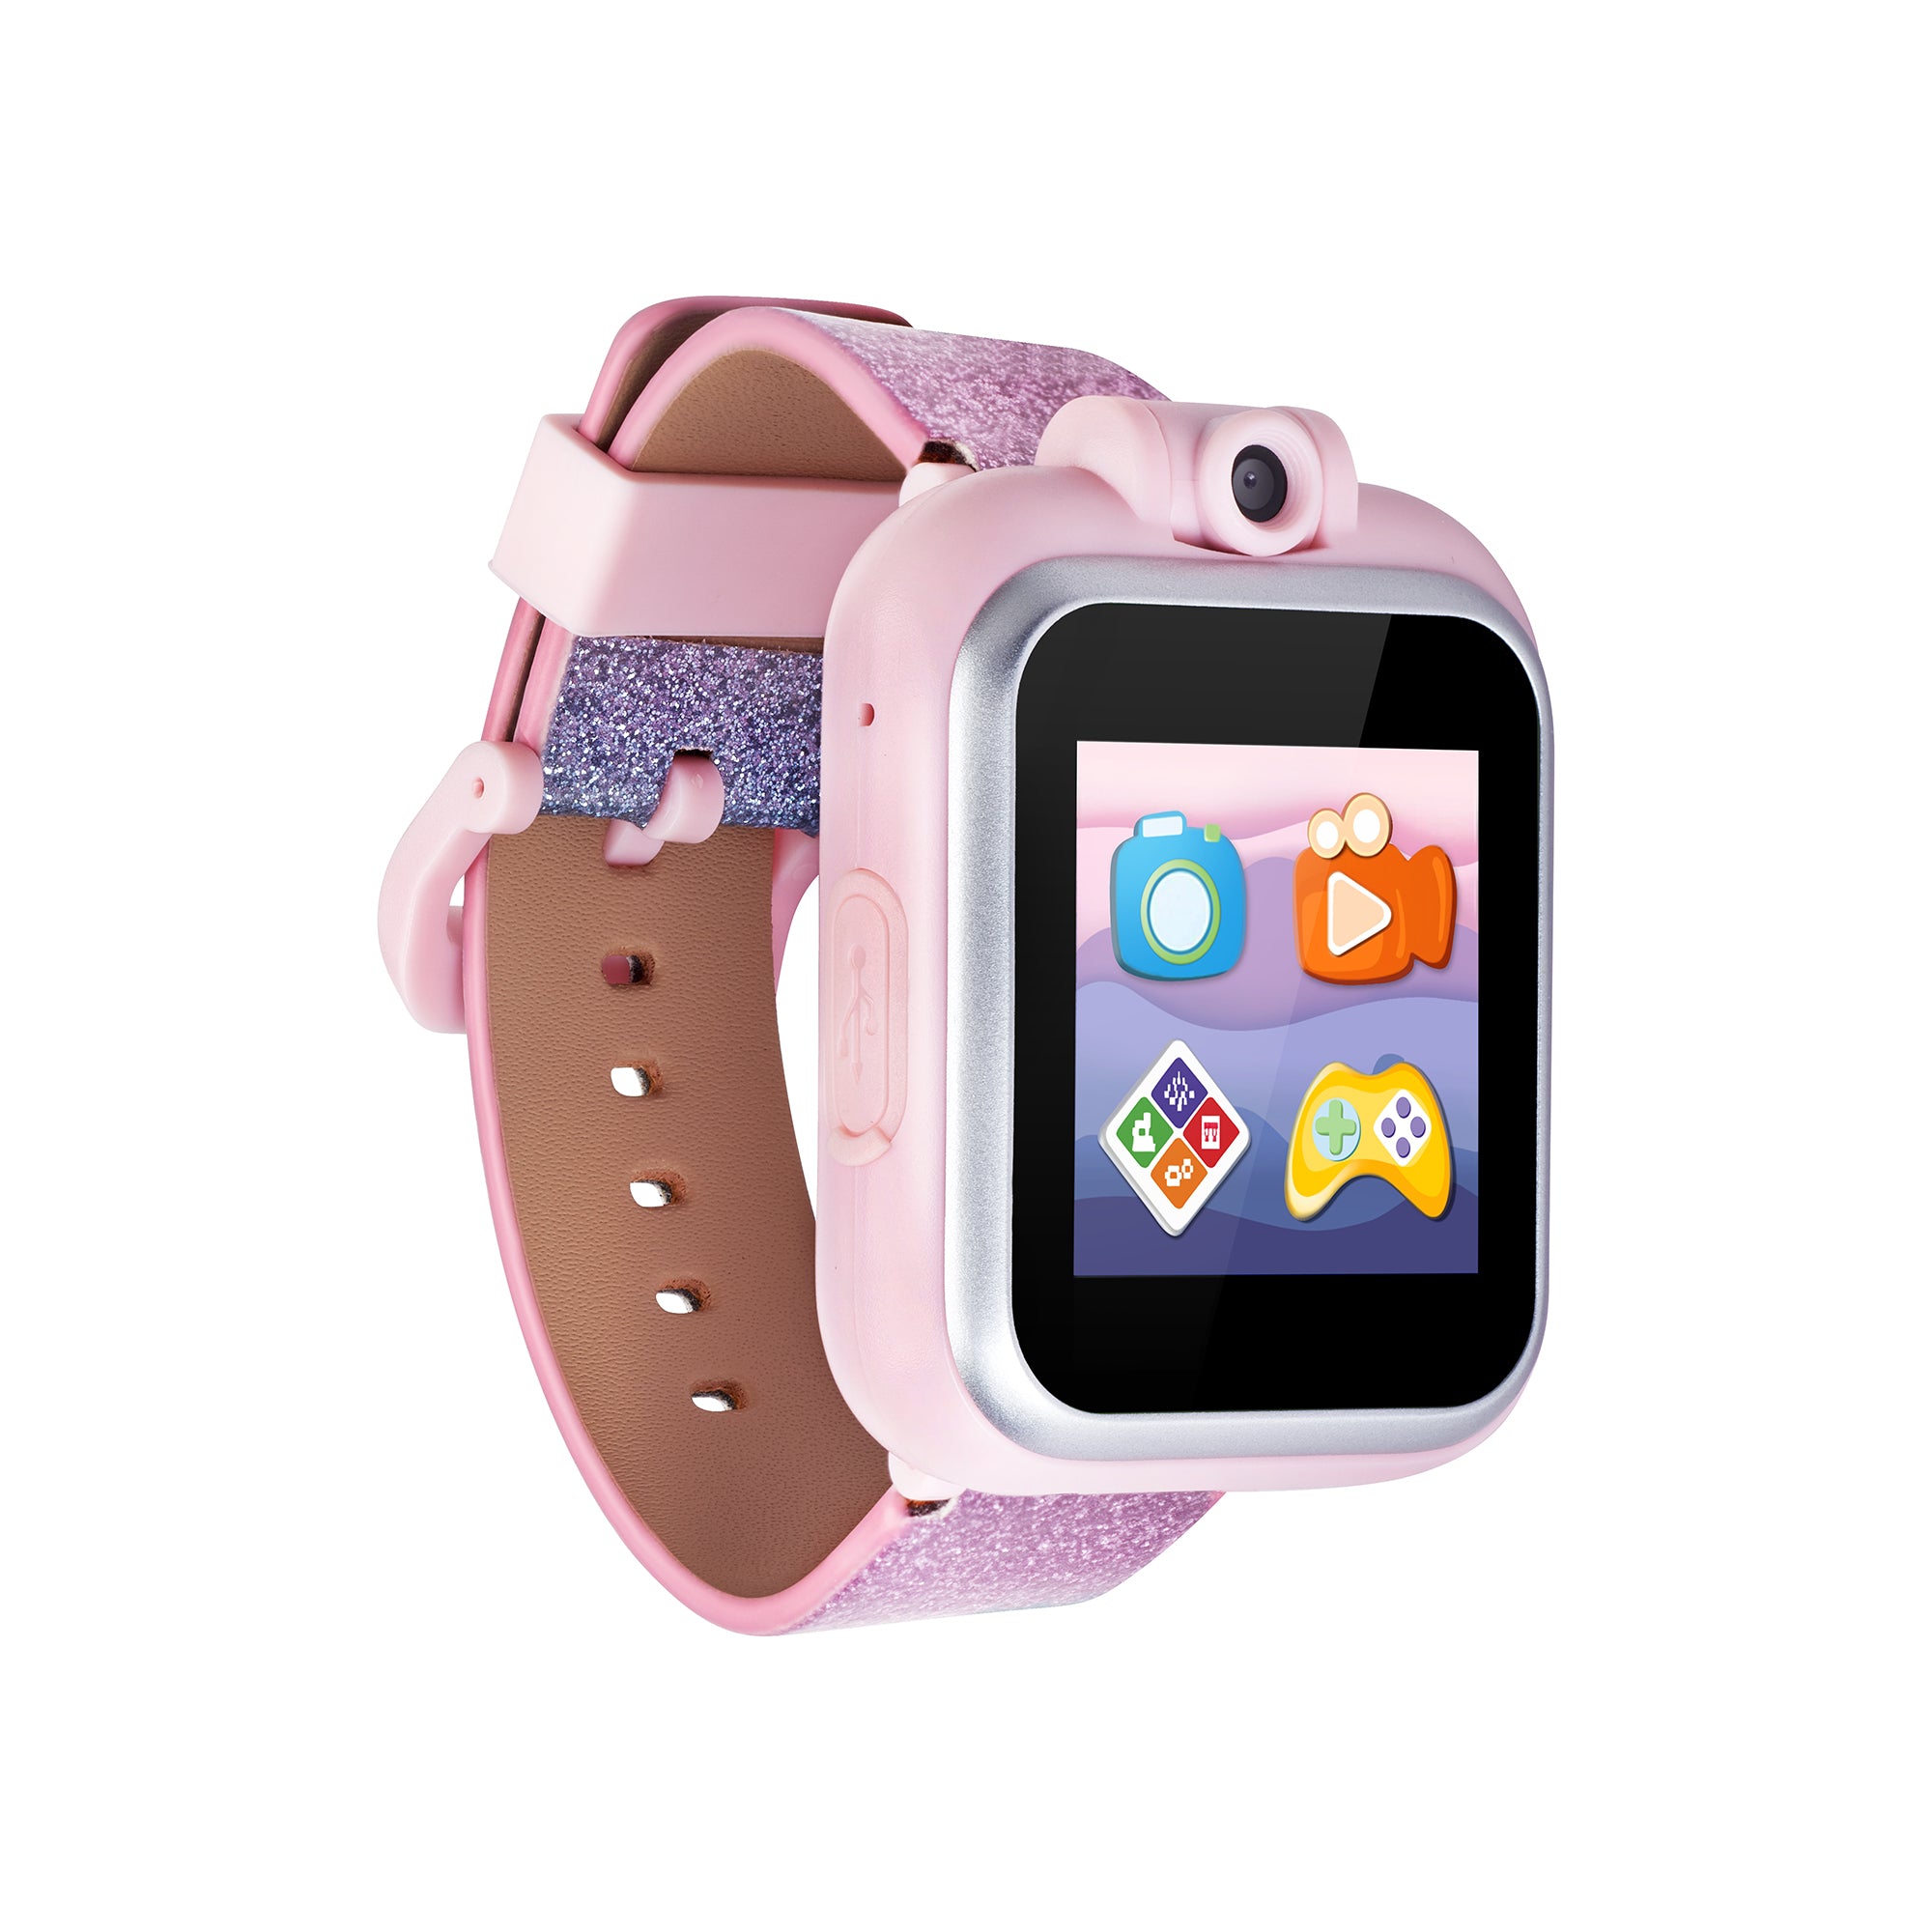 PlayZoom 2 Kids Smartwatch & Earbuds Set: Pastel Blue and Pink Glitter